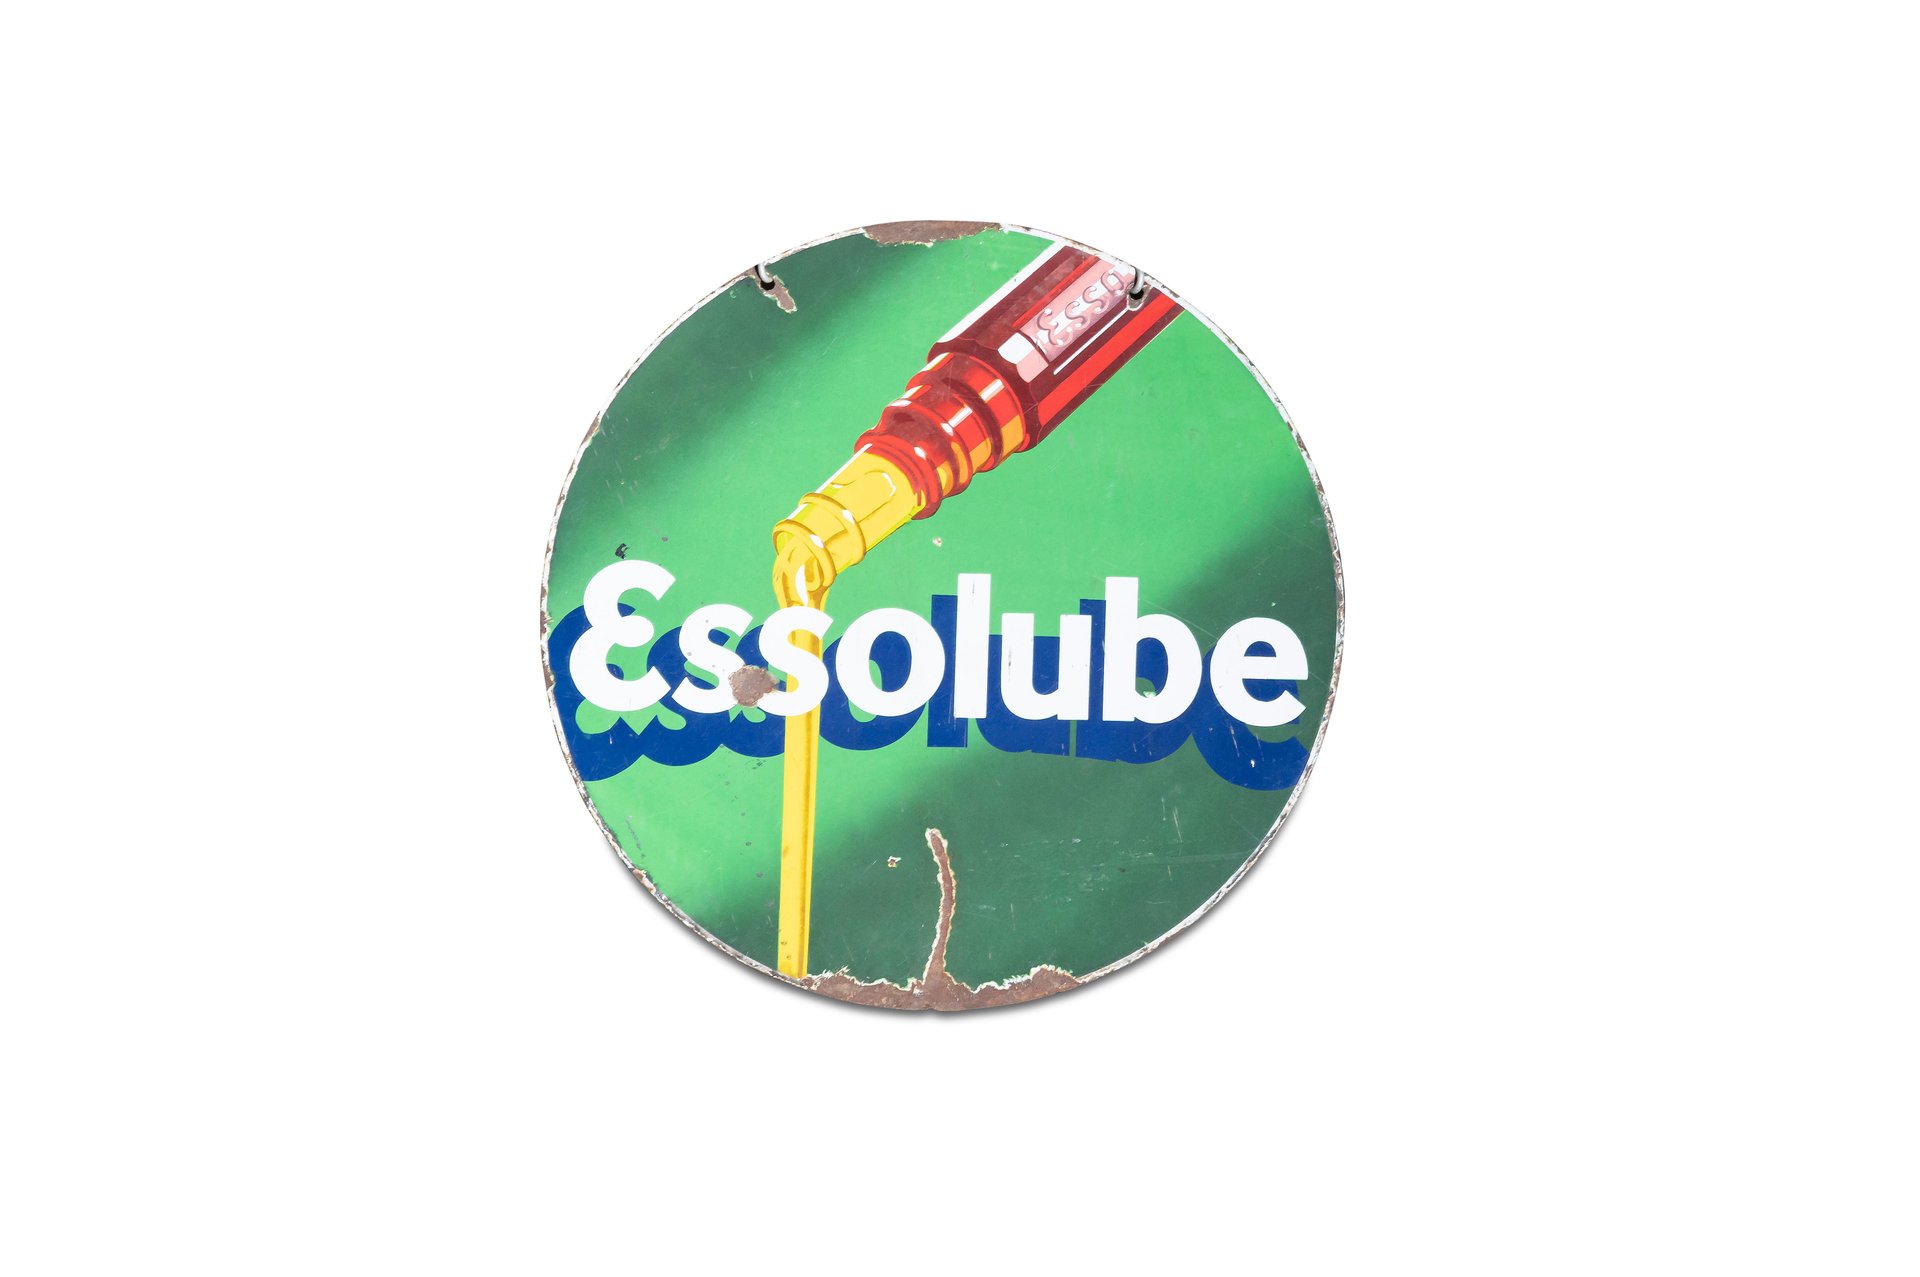 For Sale 'Essolube' Porcelain Sign, Double-Sided